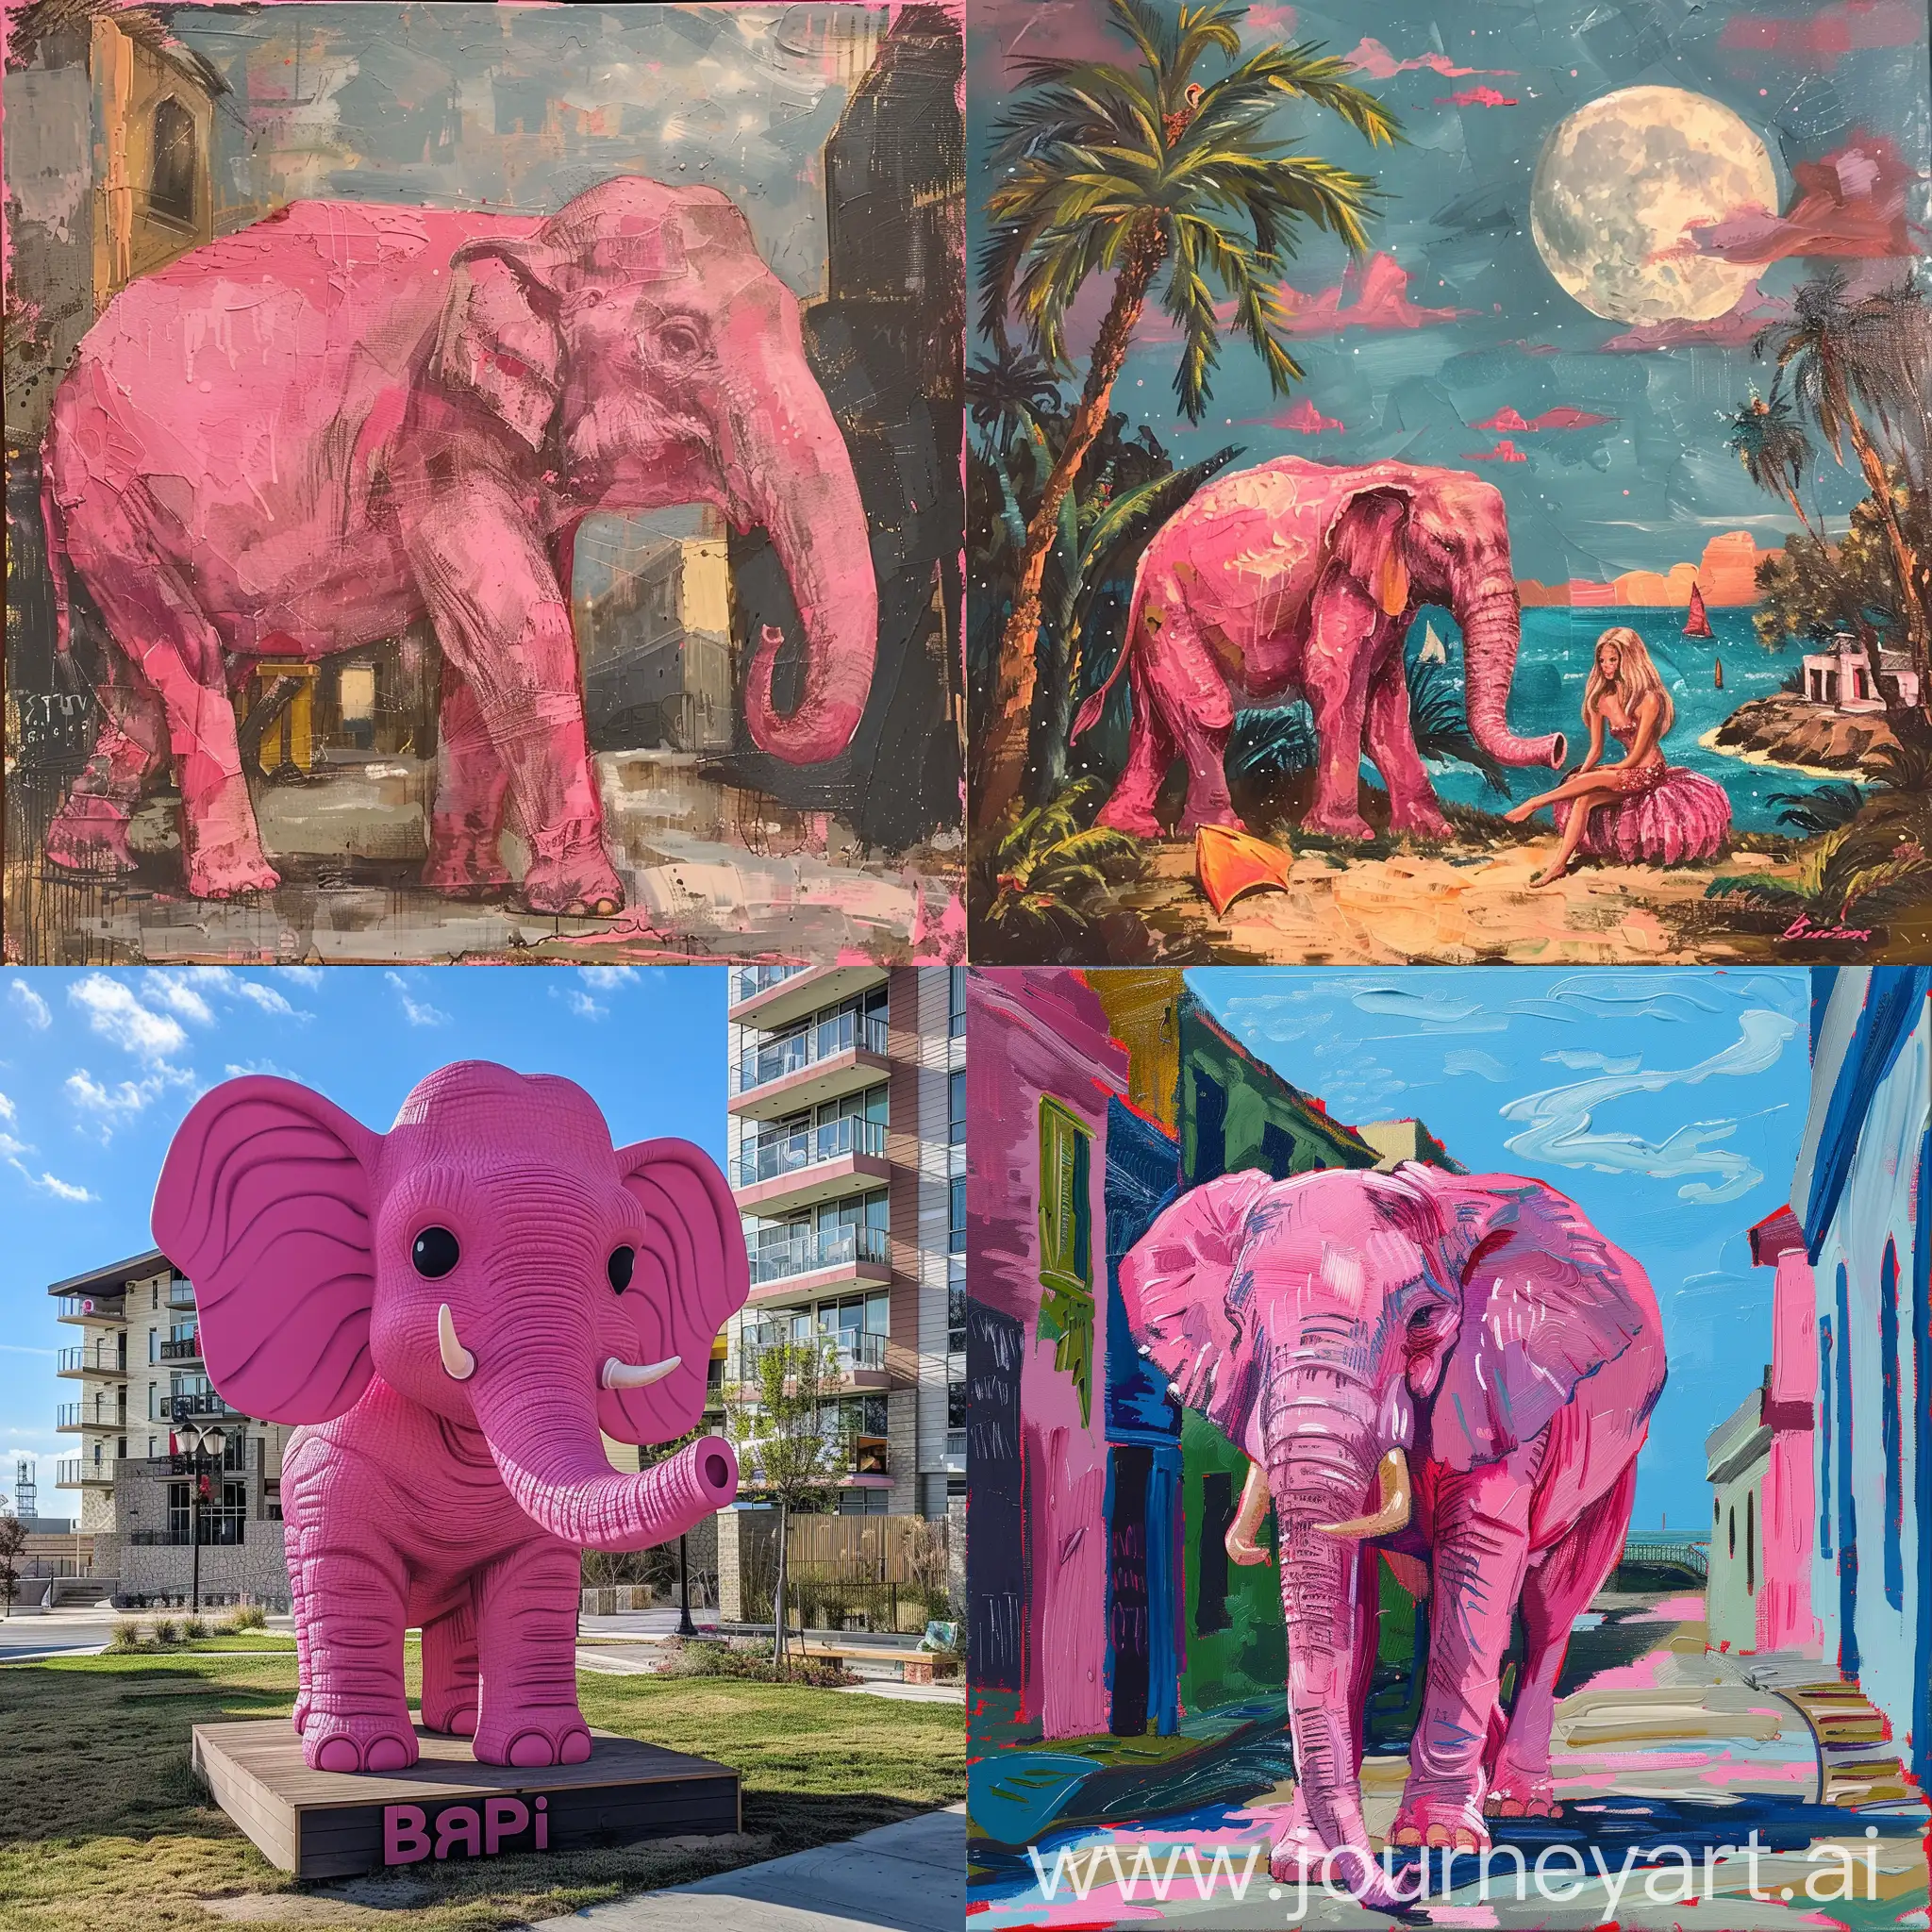 Whimsical-Encounter-Pink-Elephant-Strolling-with-Barbie-in-Vibrant-Townscape